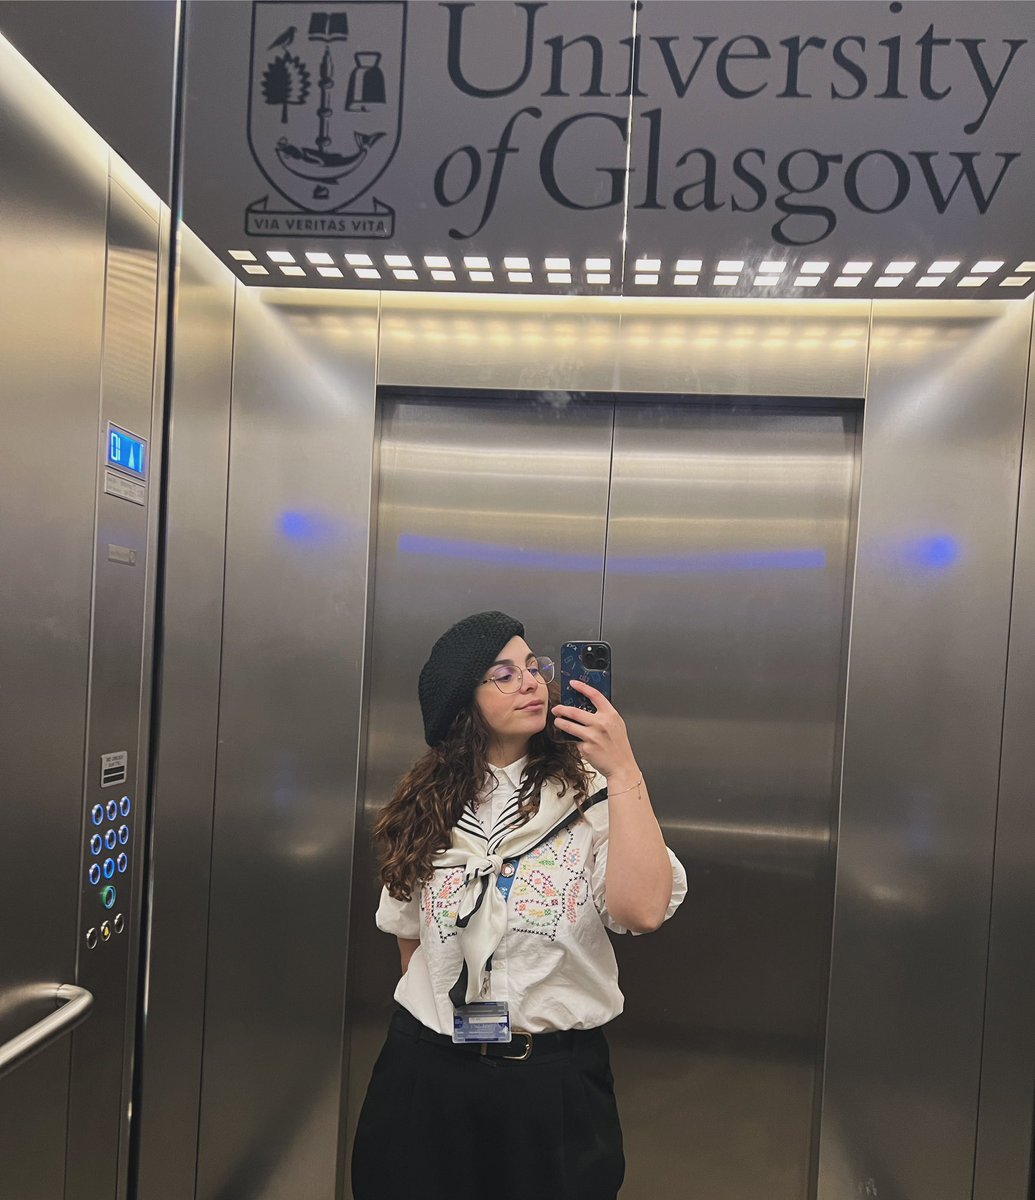 As a proud alumni of the Glasgow School of Education, I wanted to extend my heartfelt congratulations on the 25th anniversary of this esteemed institution. Experiences gained during my time there have shaped me in countless ways. @UofGEducation Hope will come back soon!